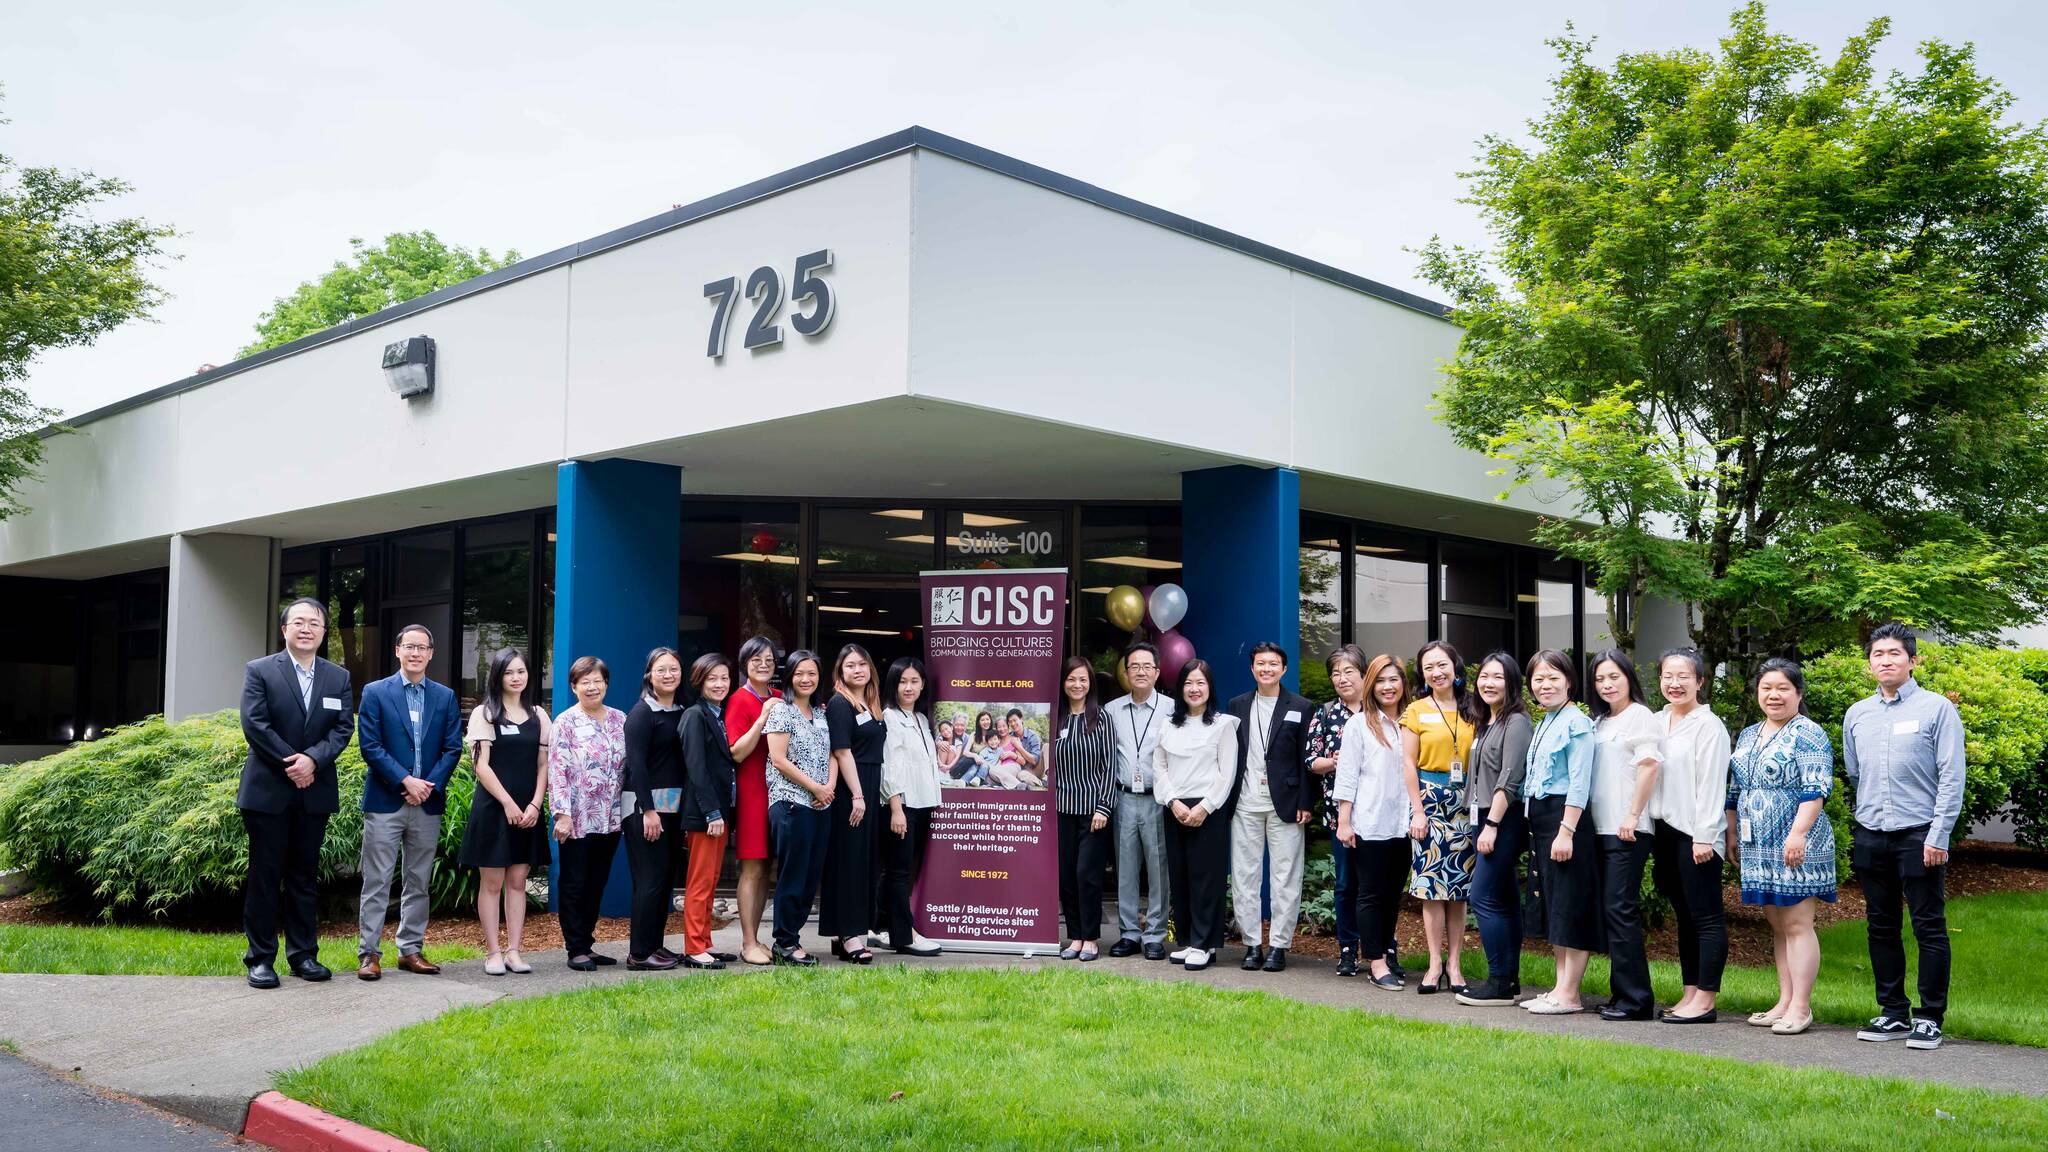 The Chinese Information Services Center (CISC) started in 1972 and opened its Renton location on May 19, 2023. (Photo Courtesy of Chinese Information Services Center)